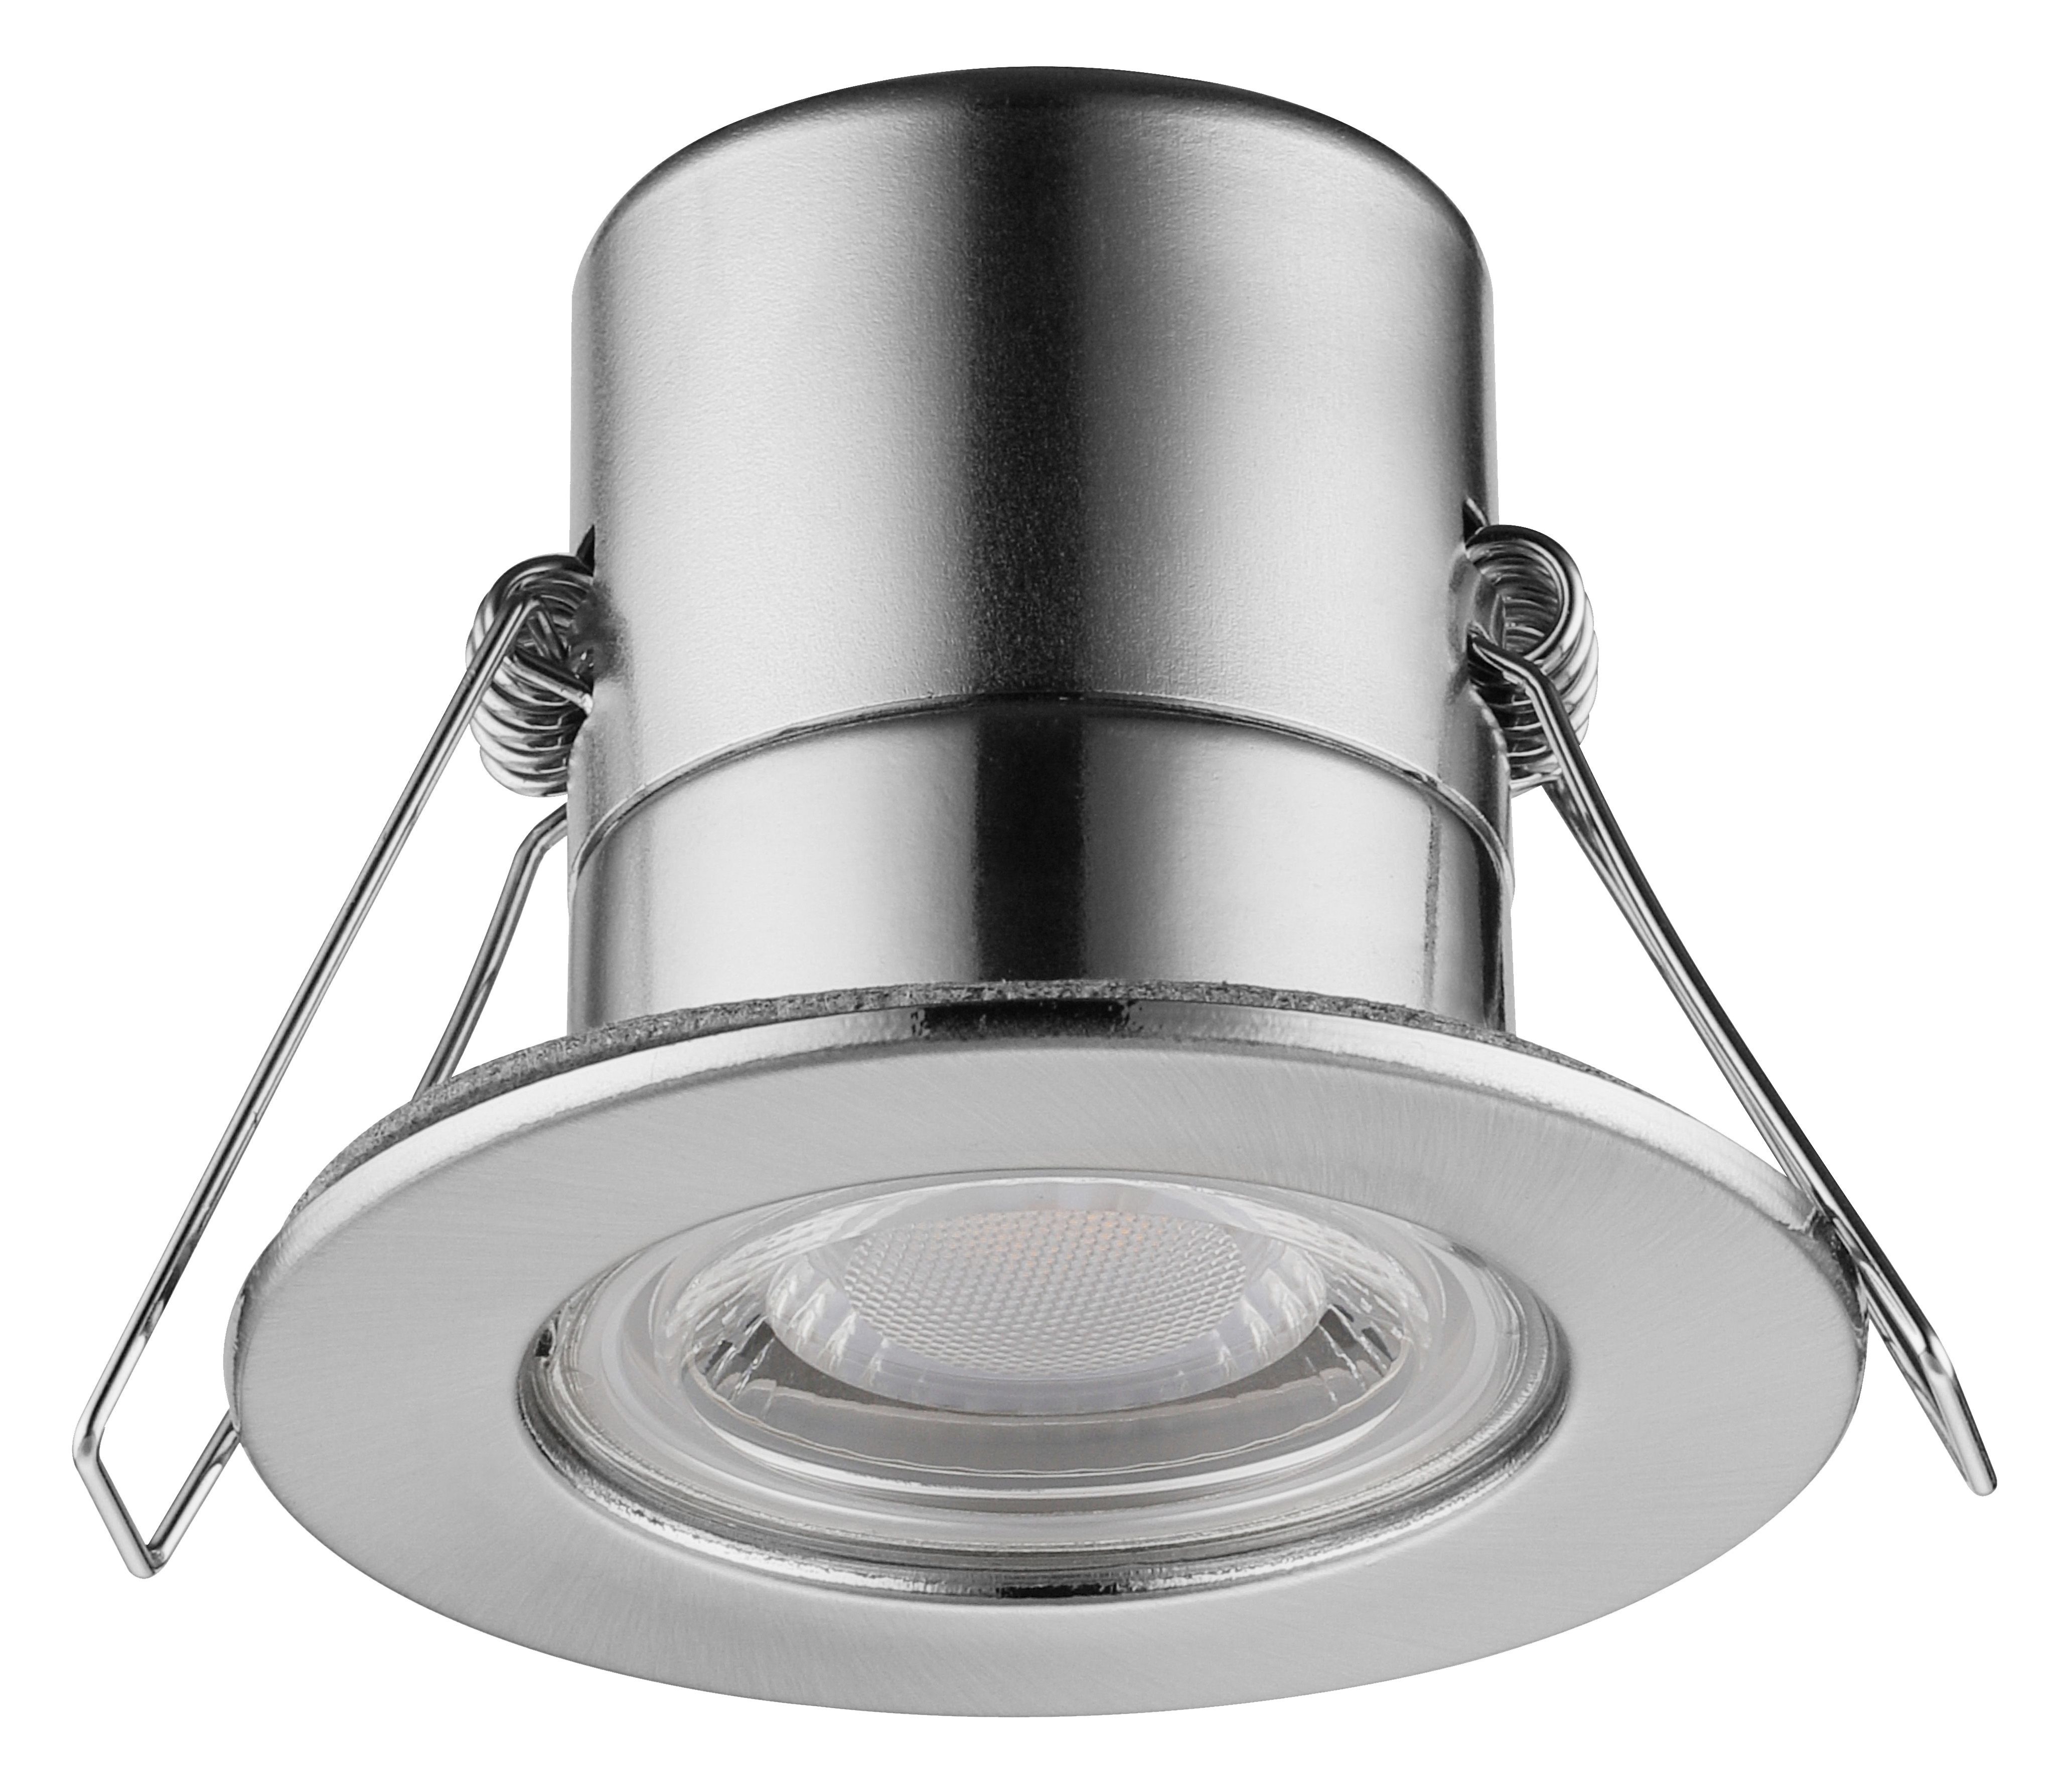 Luceco Eco Matt Silver Stainless steel effect Fixed LED Fire-rated Warm white Downlight 5W IP65